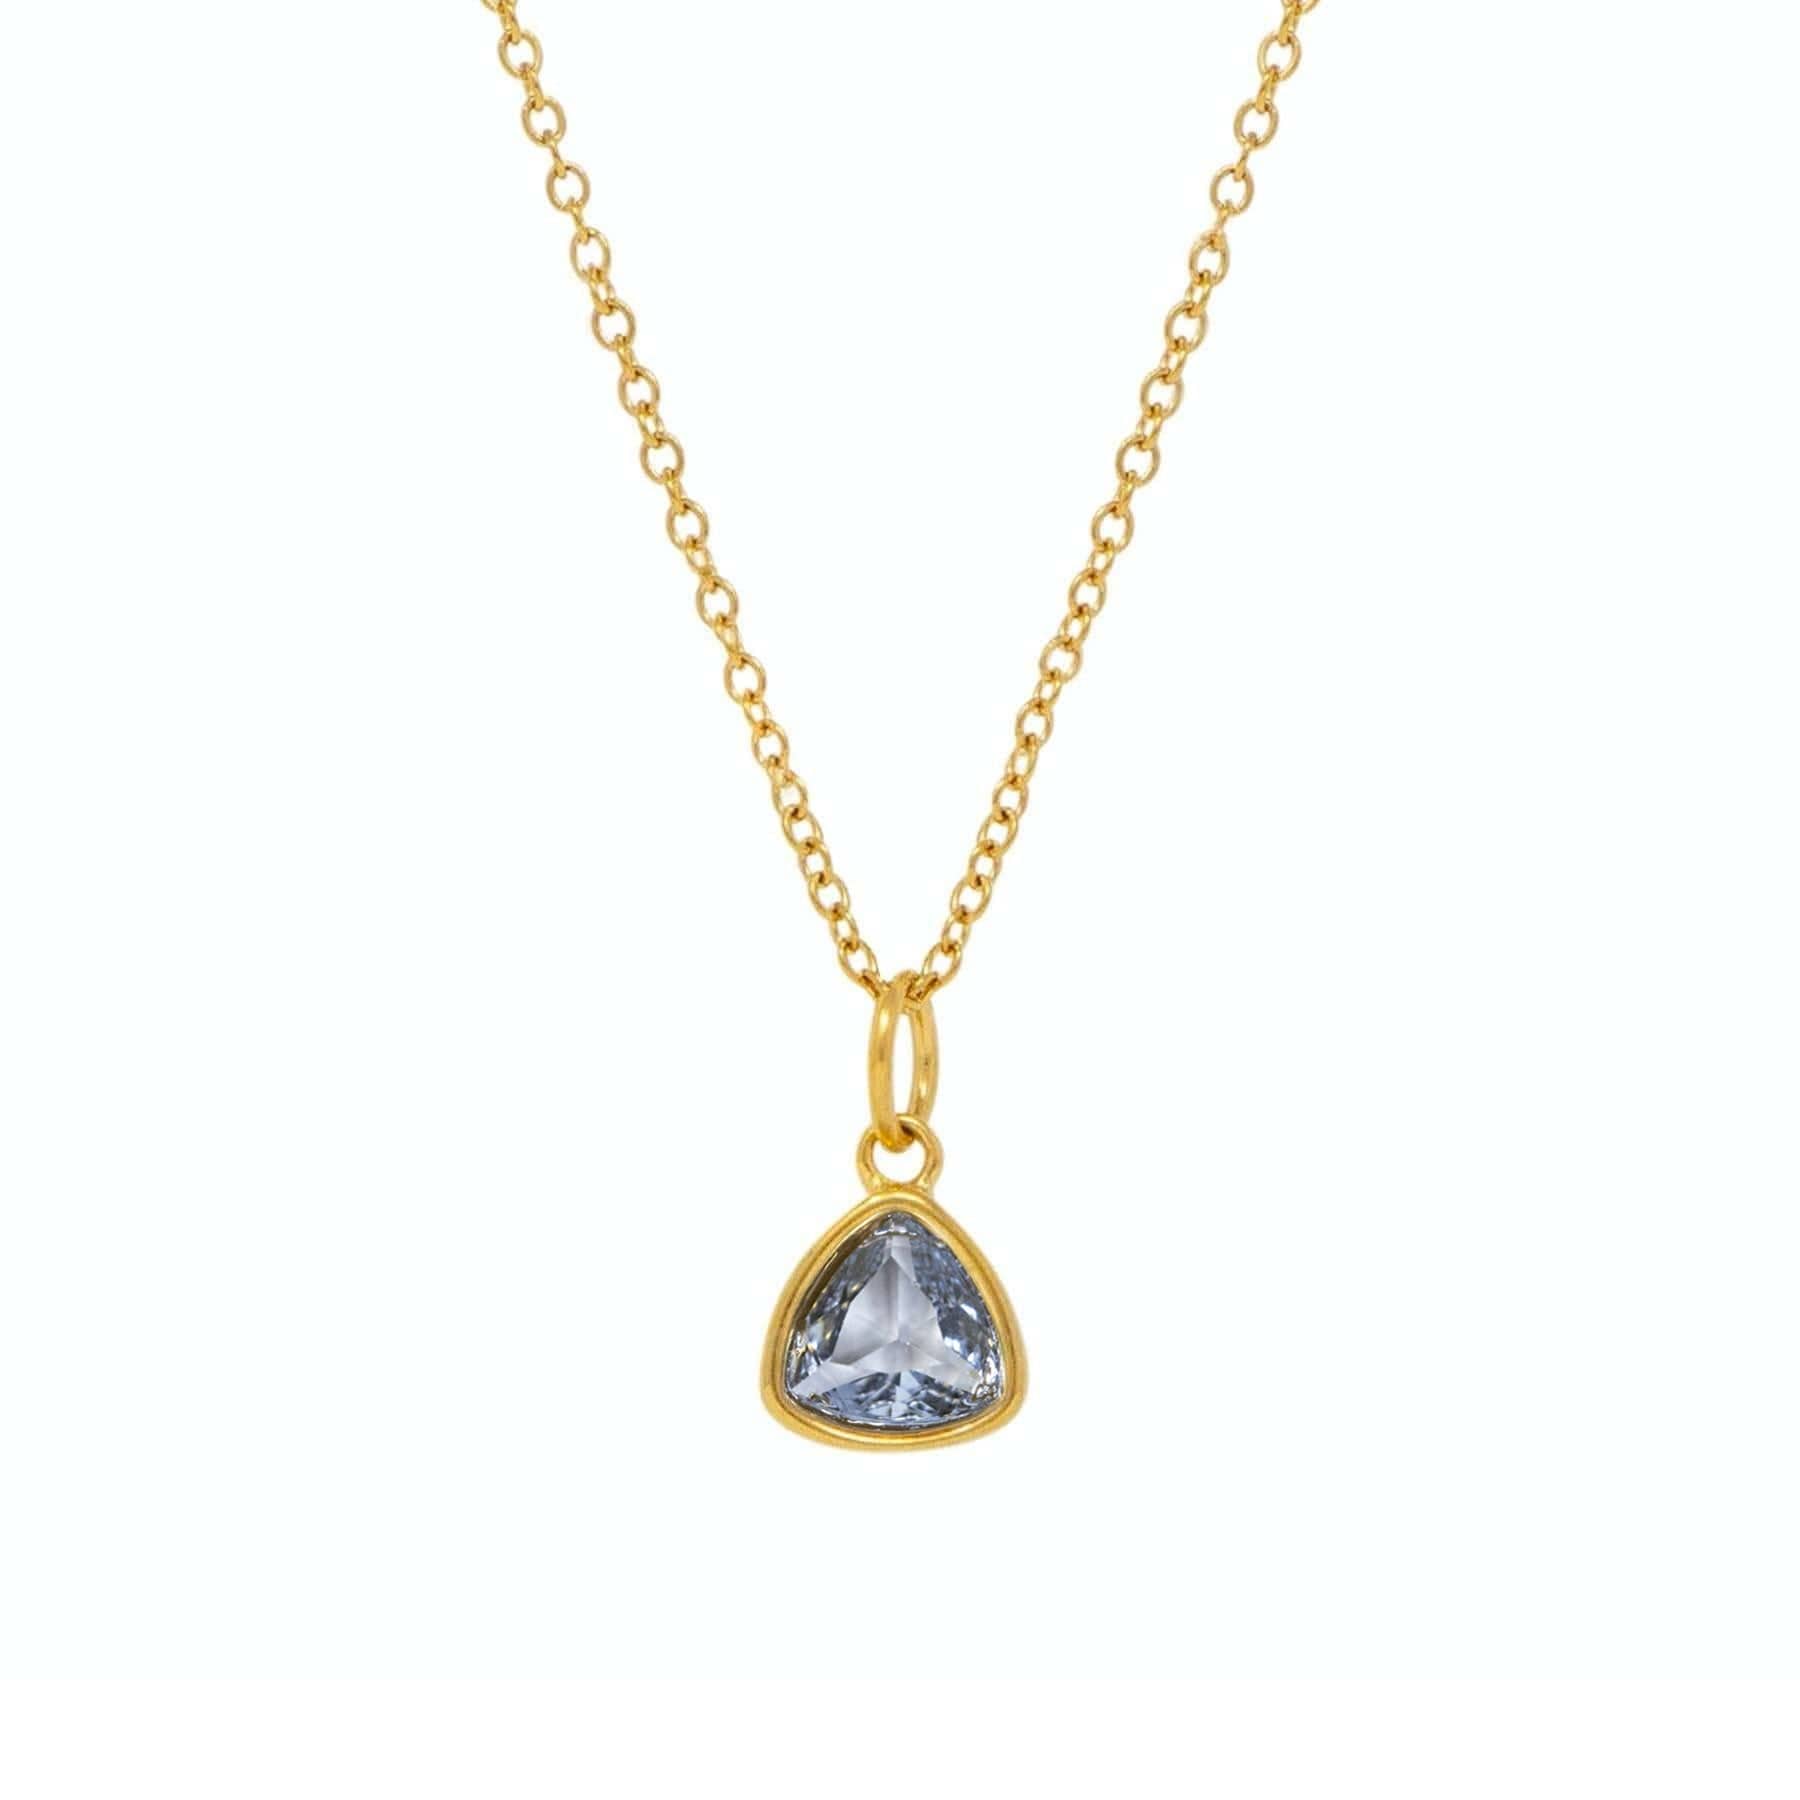 BohoMoon Stainless Steel Trio Birthstone Necklace Gold / March